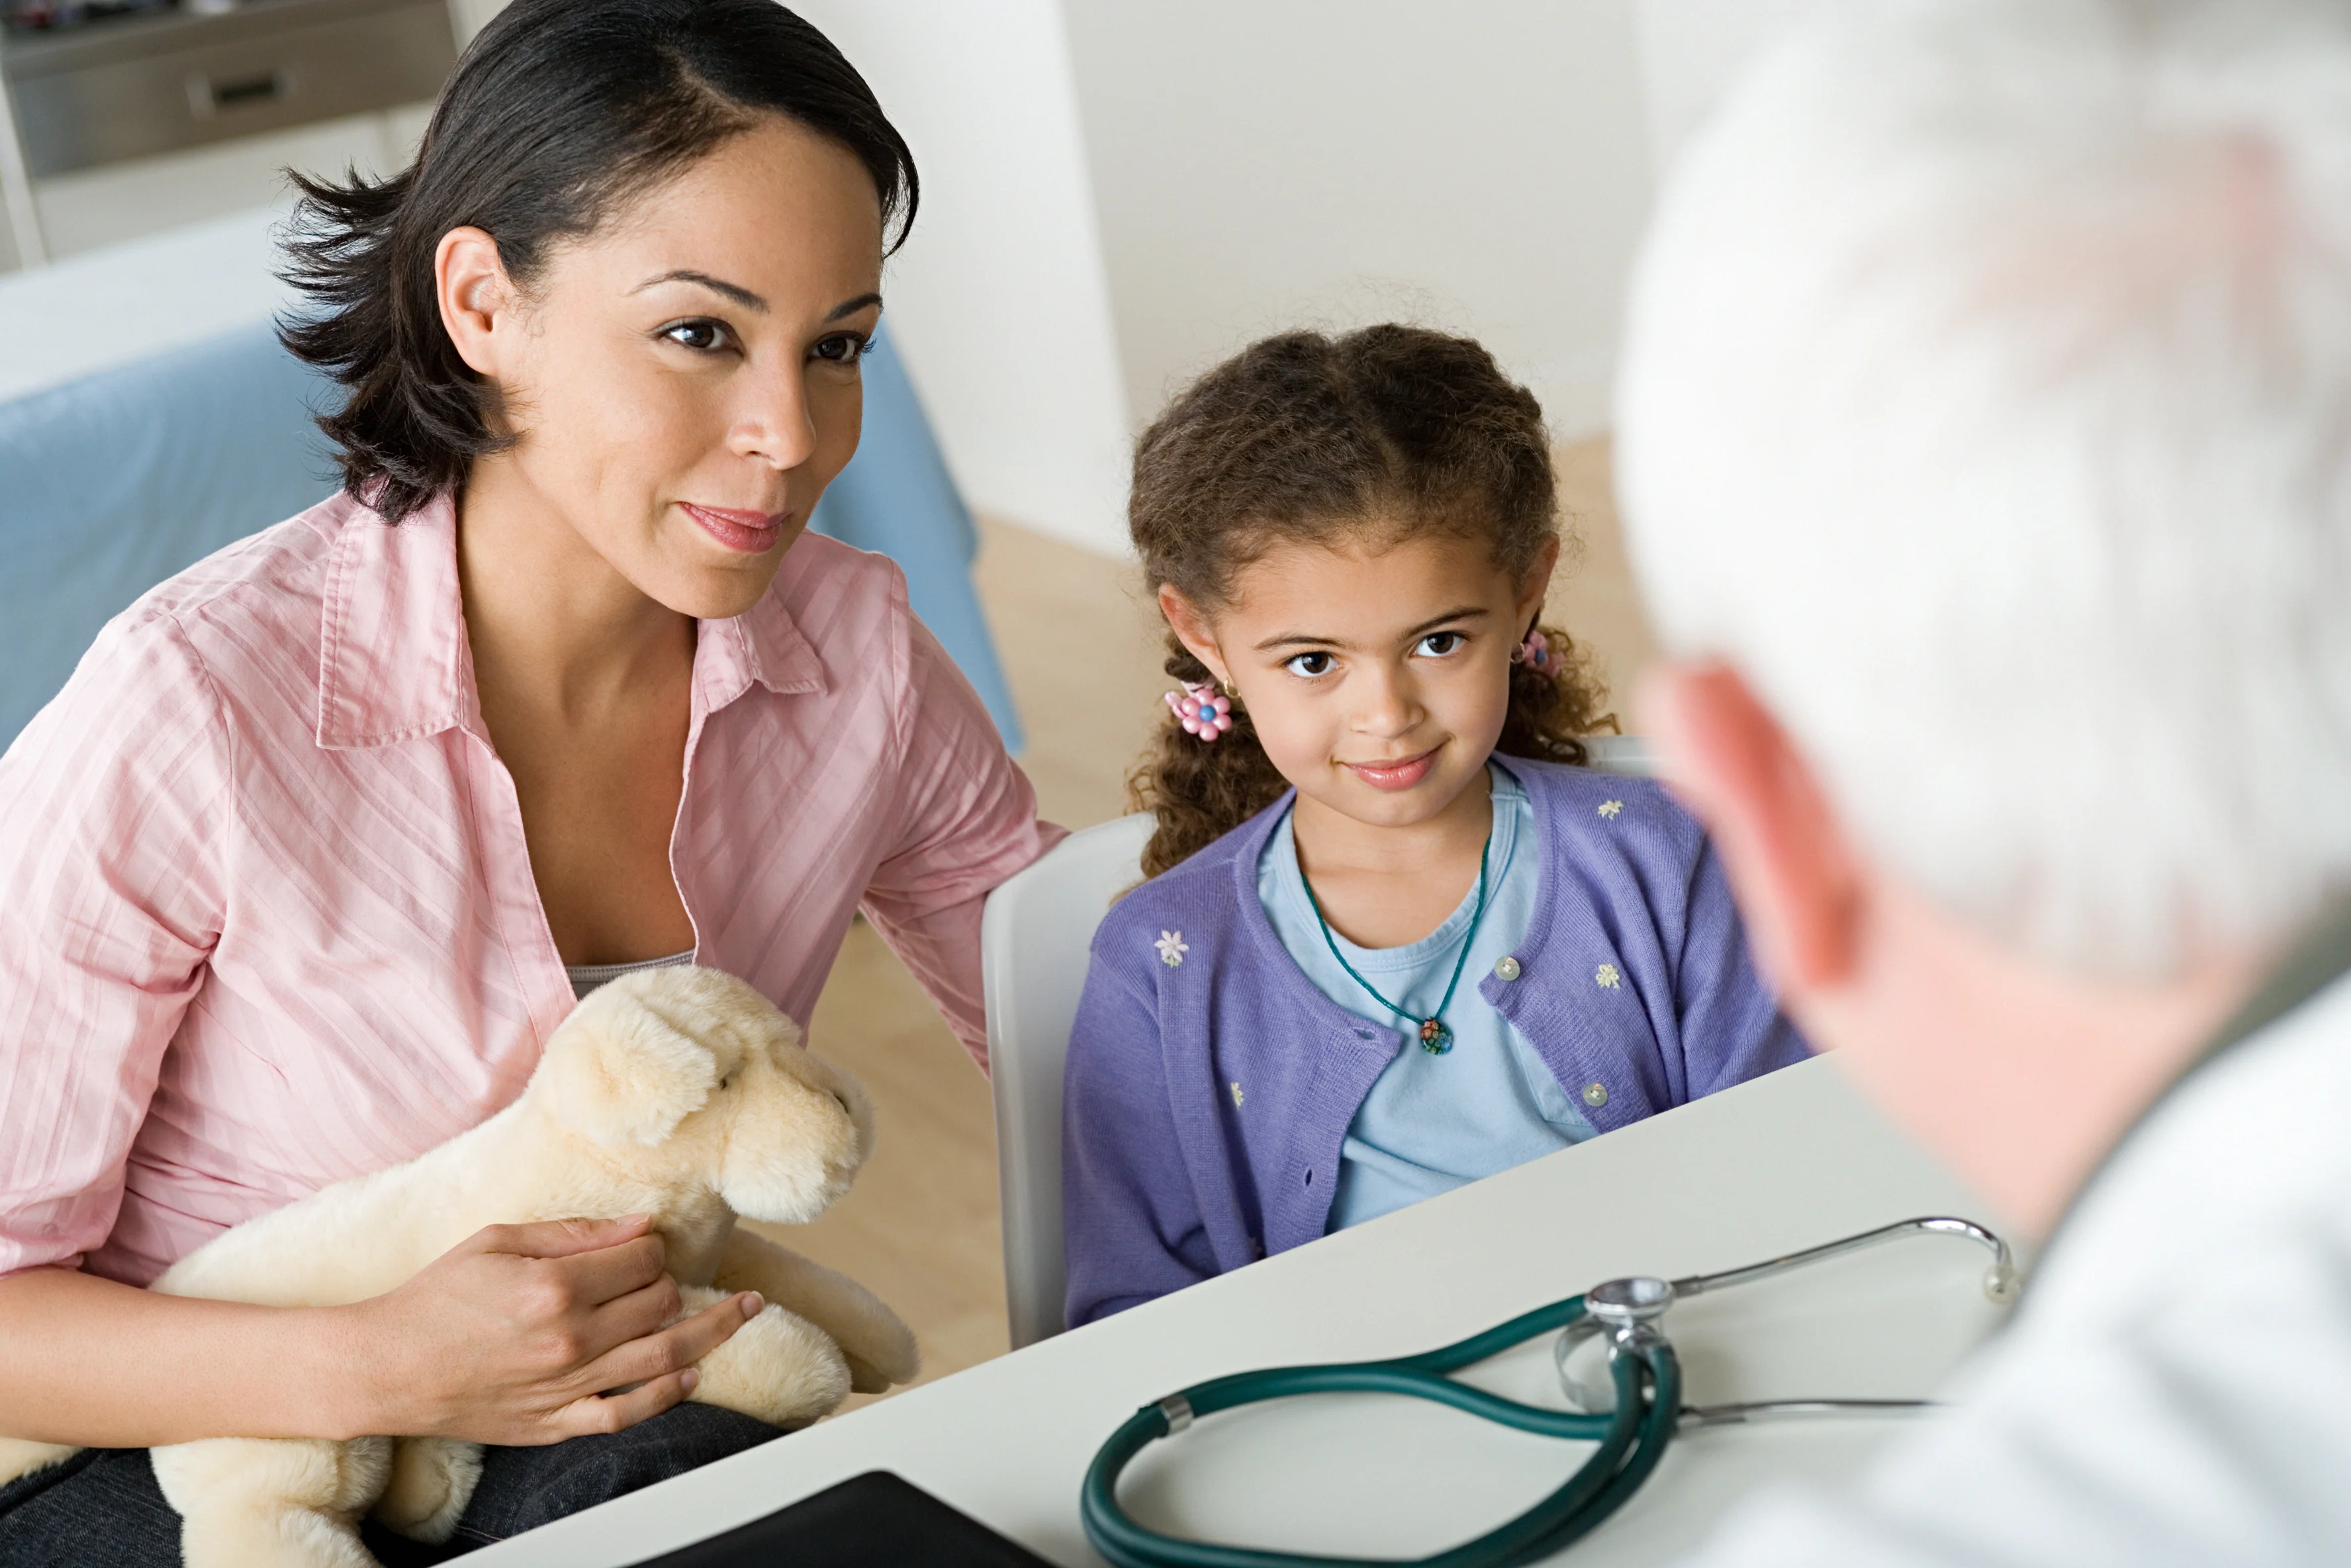 a doctor and a child looking at a stuffed animal